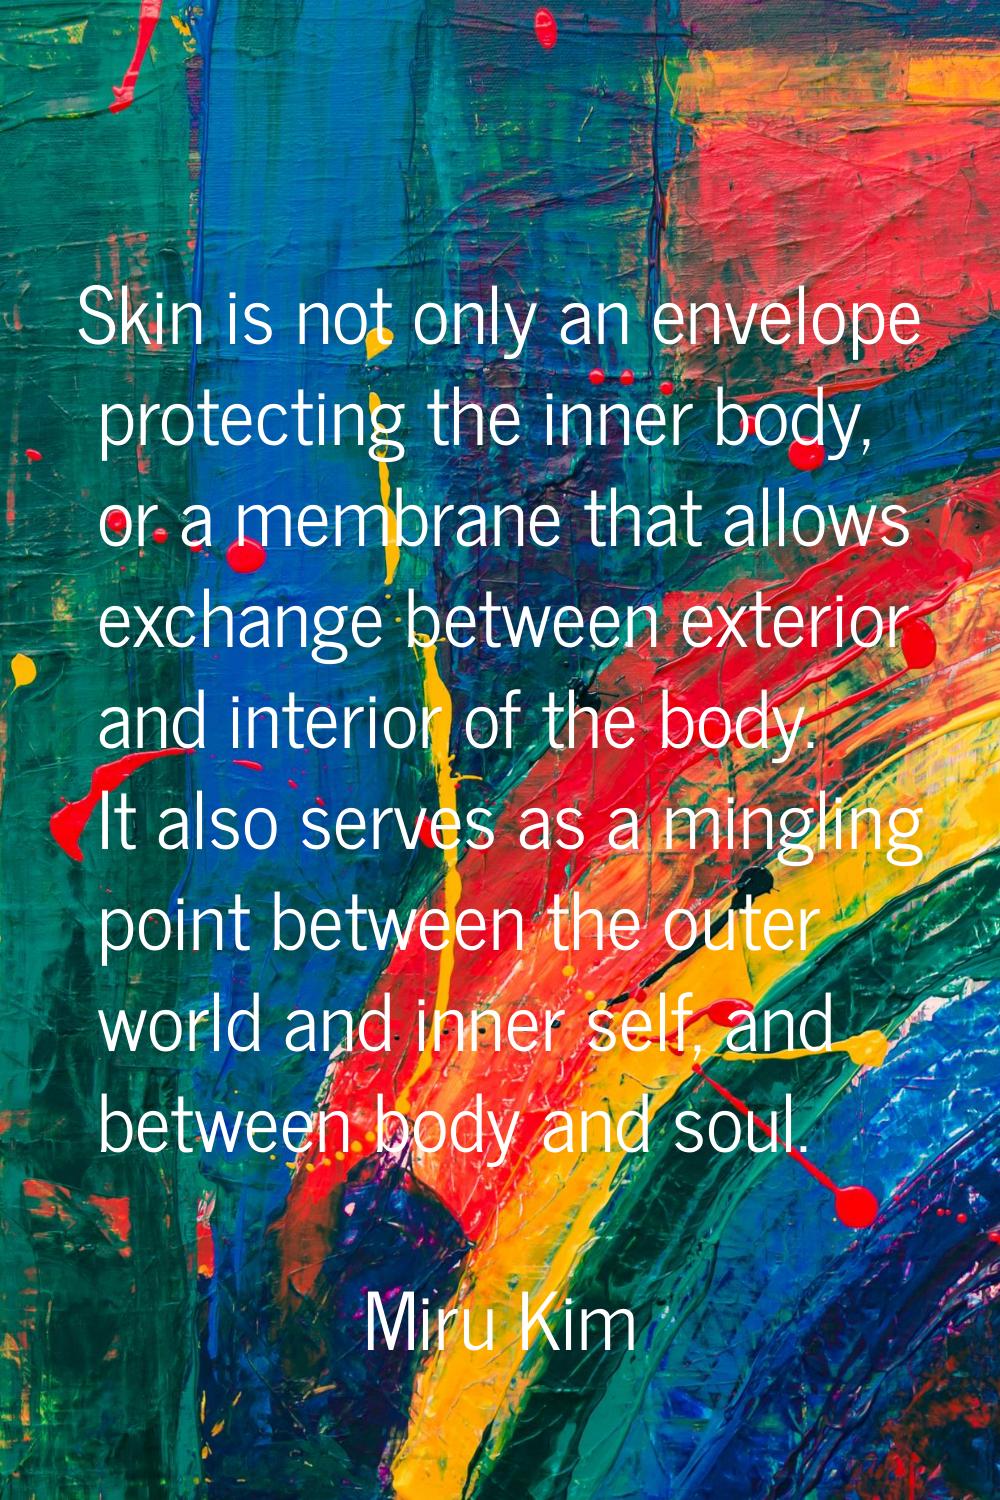 Skin is not only an envelope protecting the inner body, or a membrane that allows exchange between 